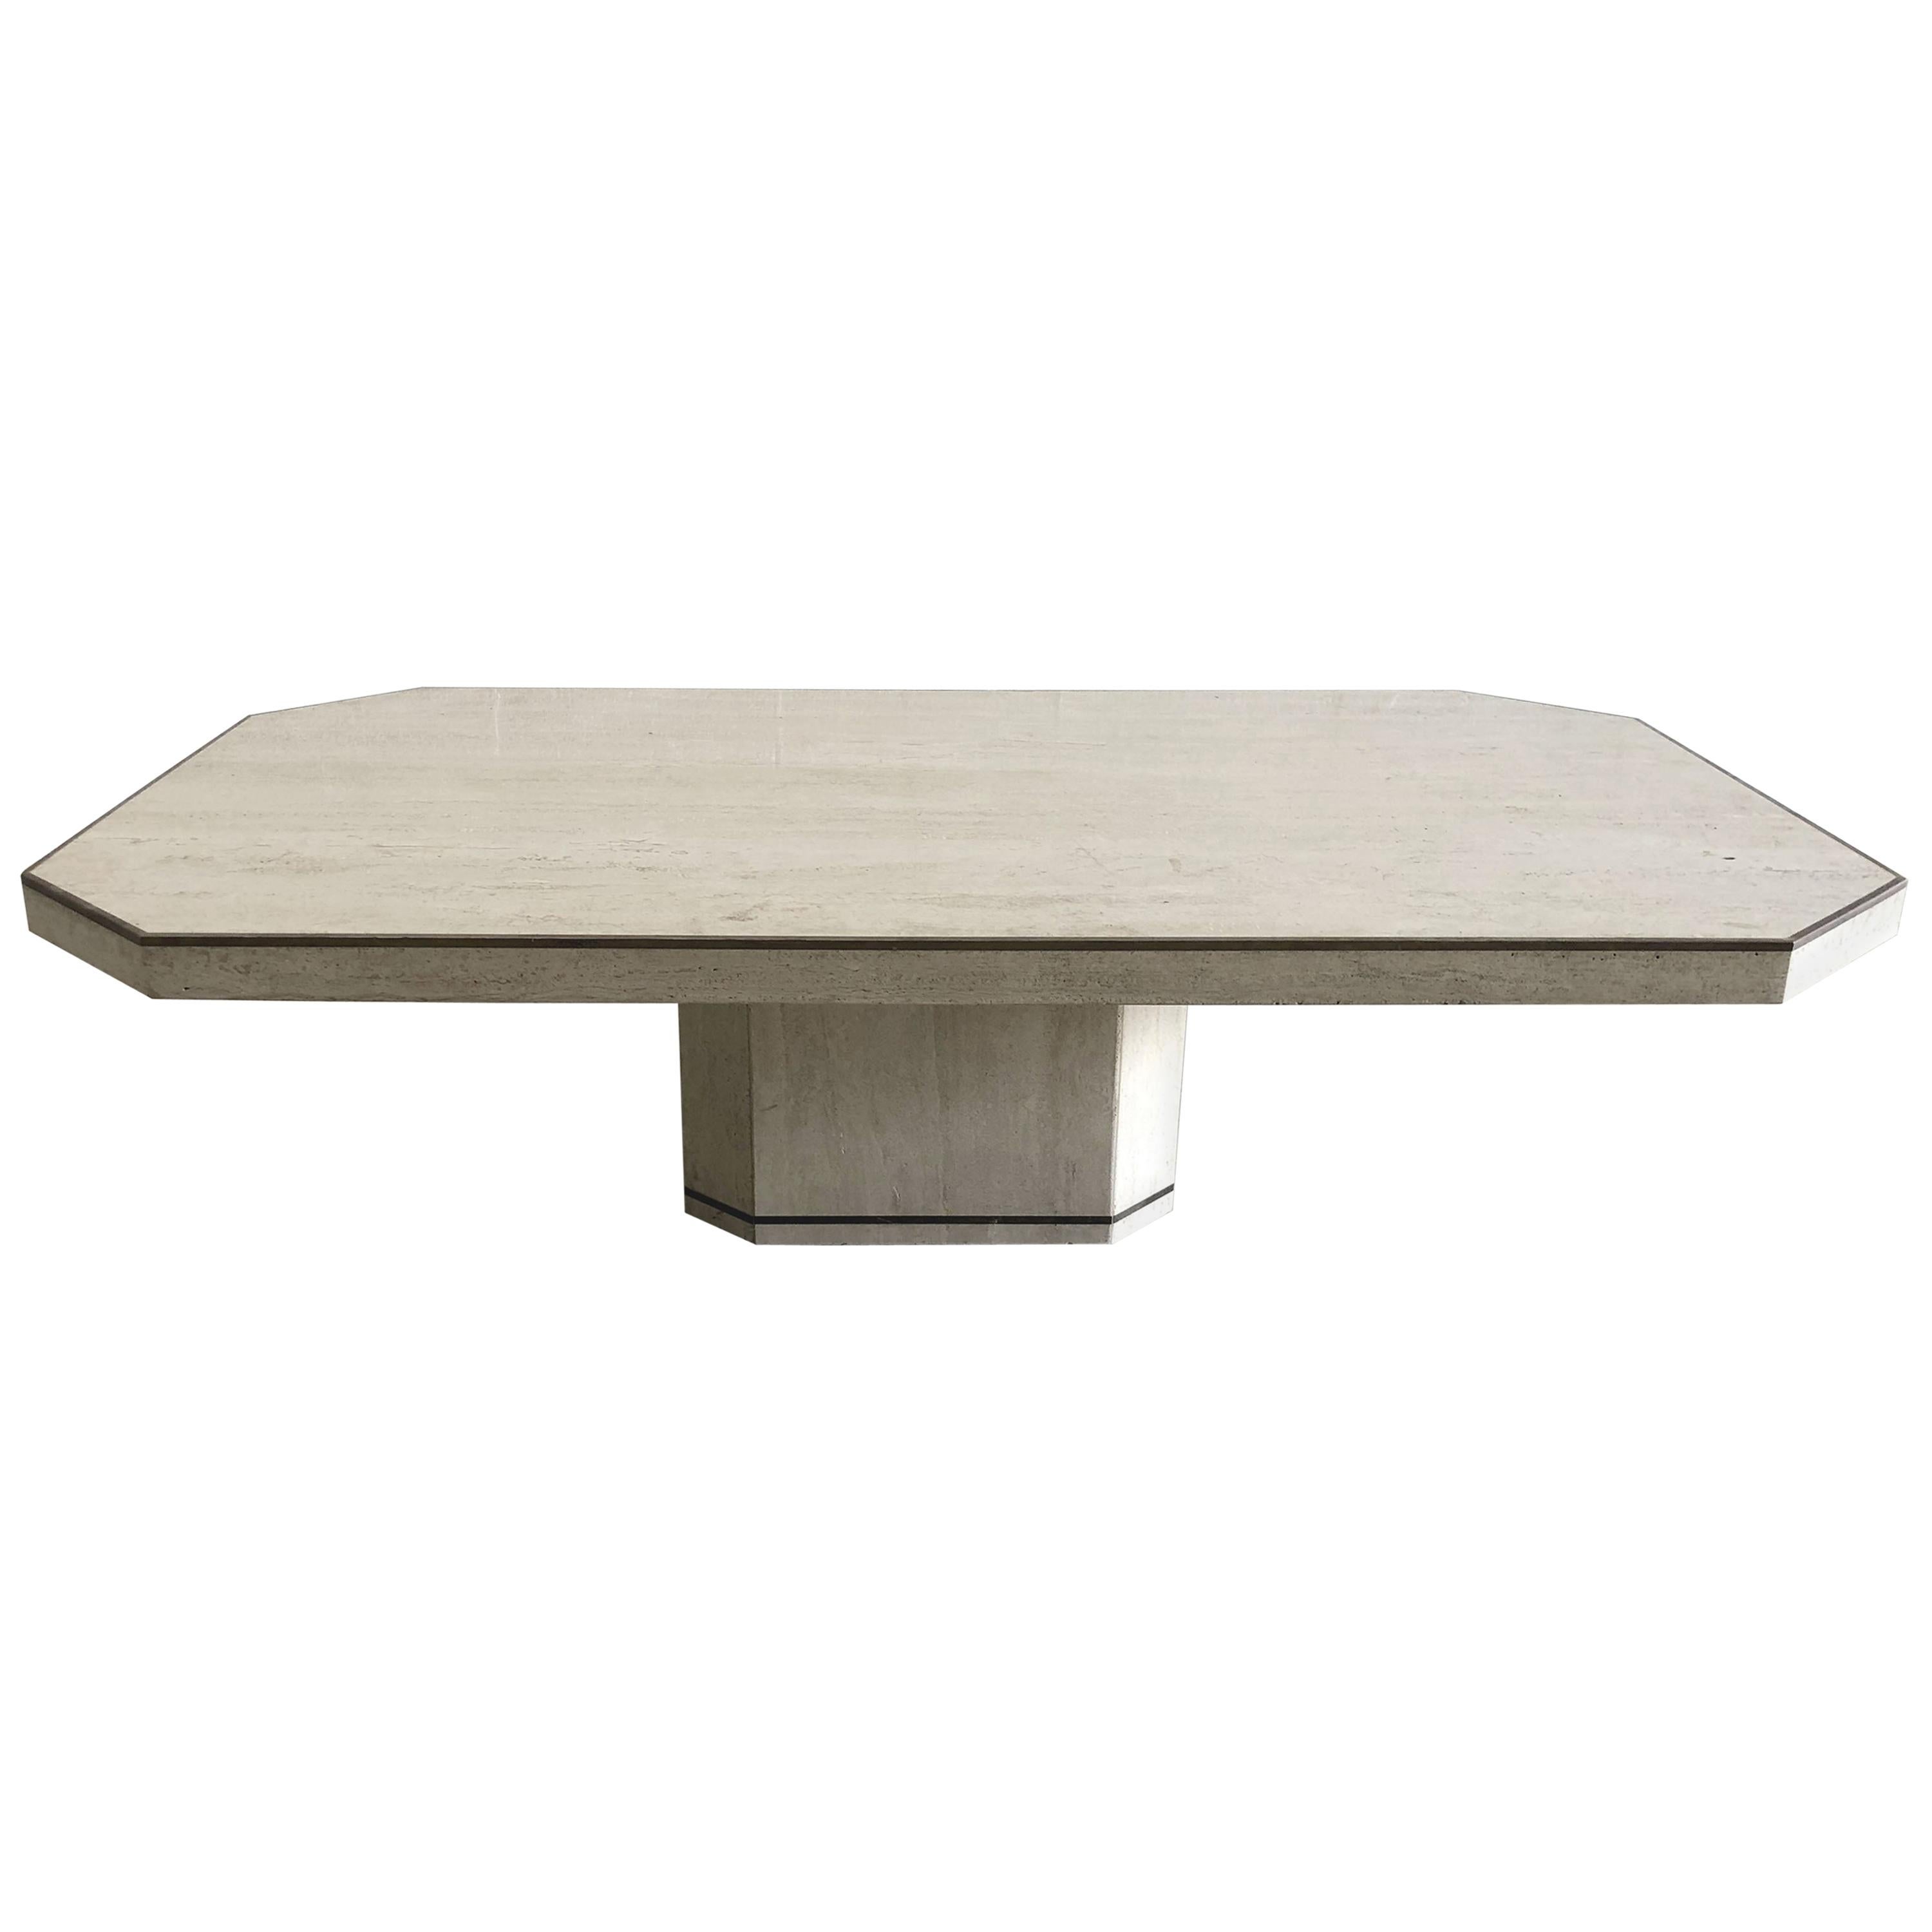 Italian Modern Travertine Marble Coffee Table for Jean Charles, Willy Rizzo